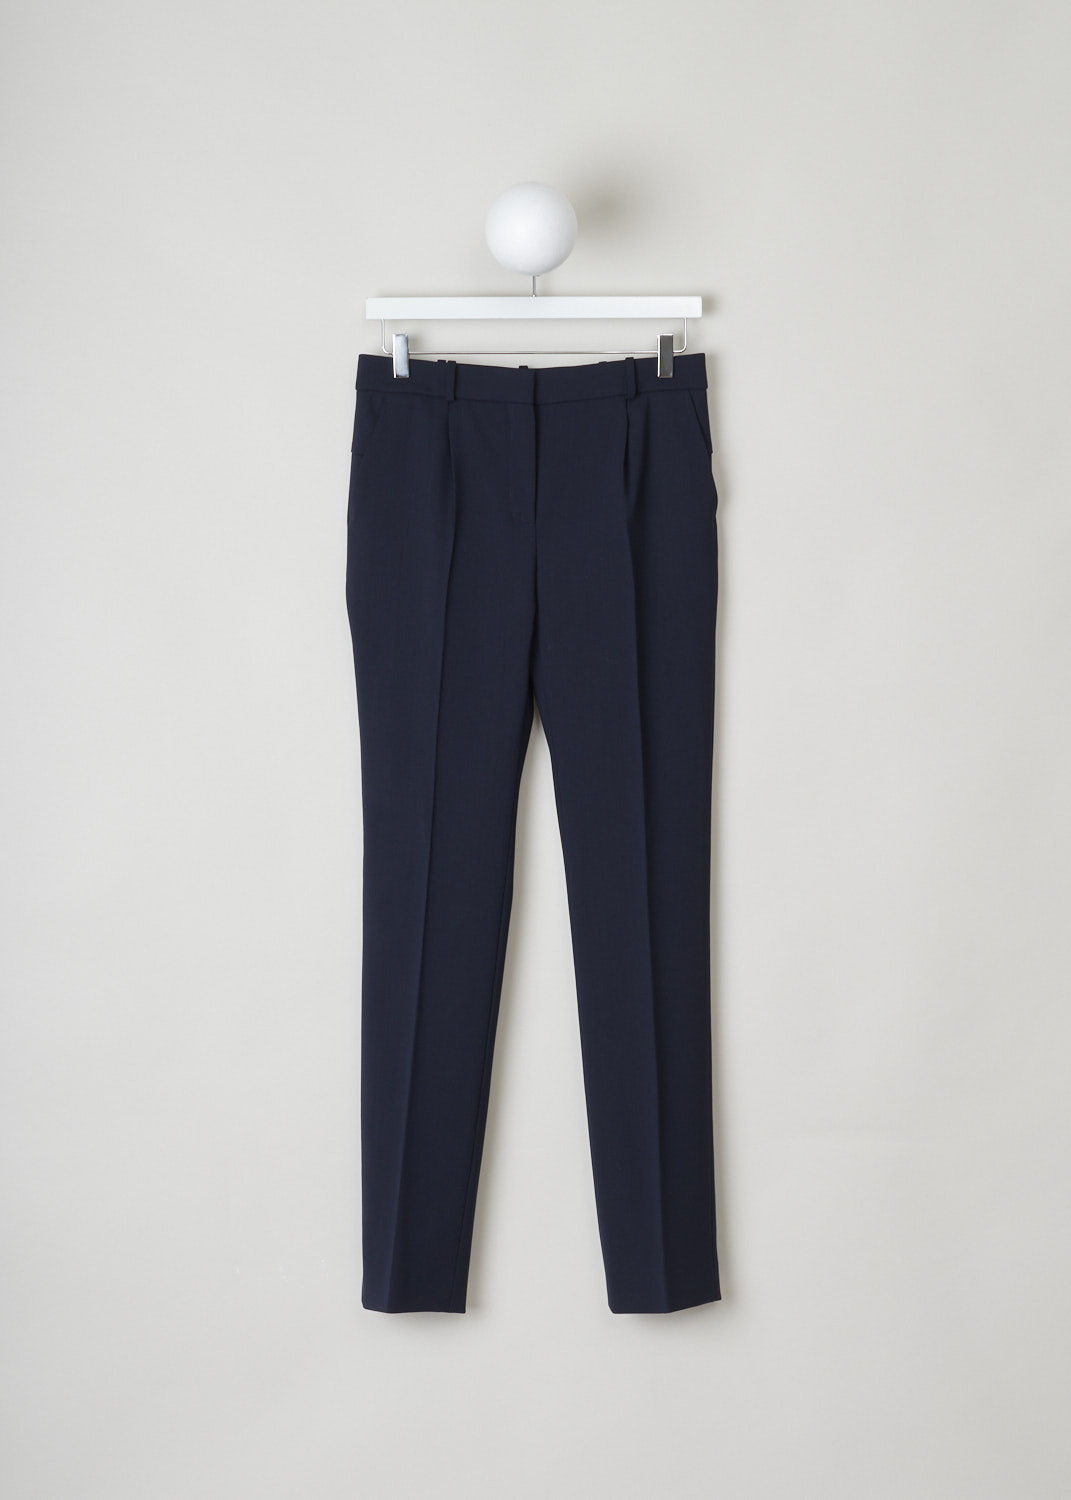 Balenciaga, Pleated navy pants, 413371_TQI08_8065, blue, front, Navy pants comes adorned with pleats and froward slanted pockets on the front. Featuring a slightly tapered fit throughout the legs and decorating the back are two welt pockets. The fastening option here comes in the form of zipper, metal clip and bearer button. 